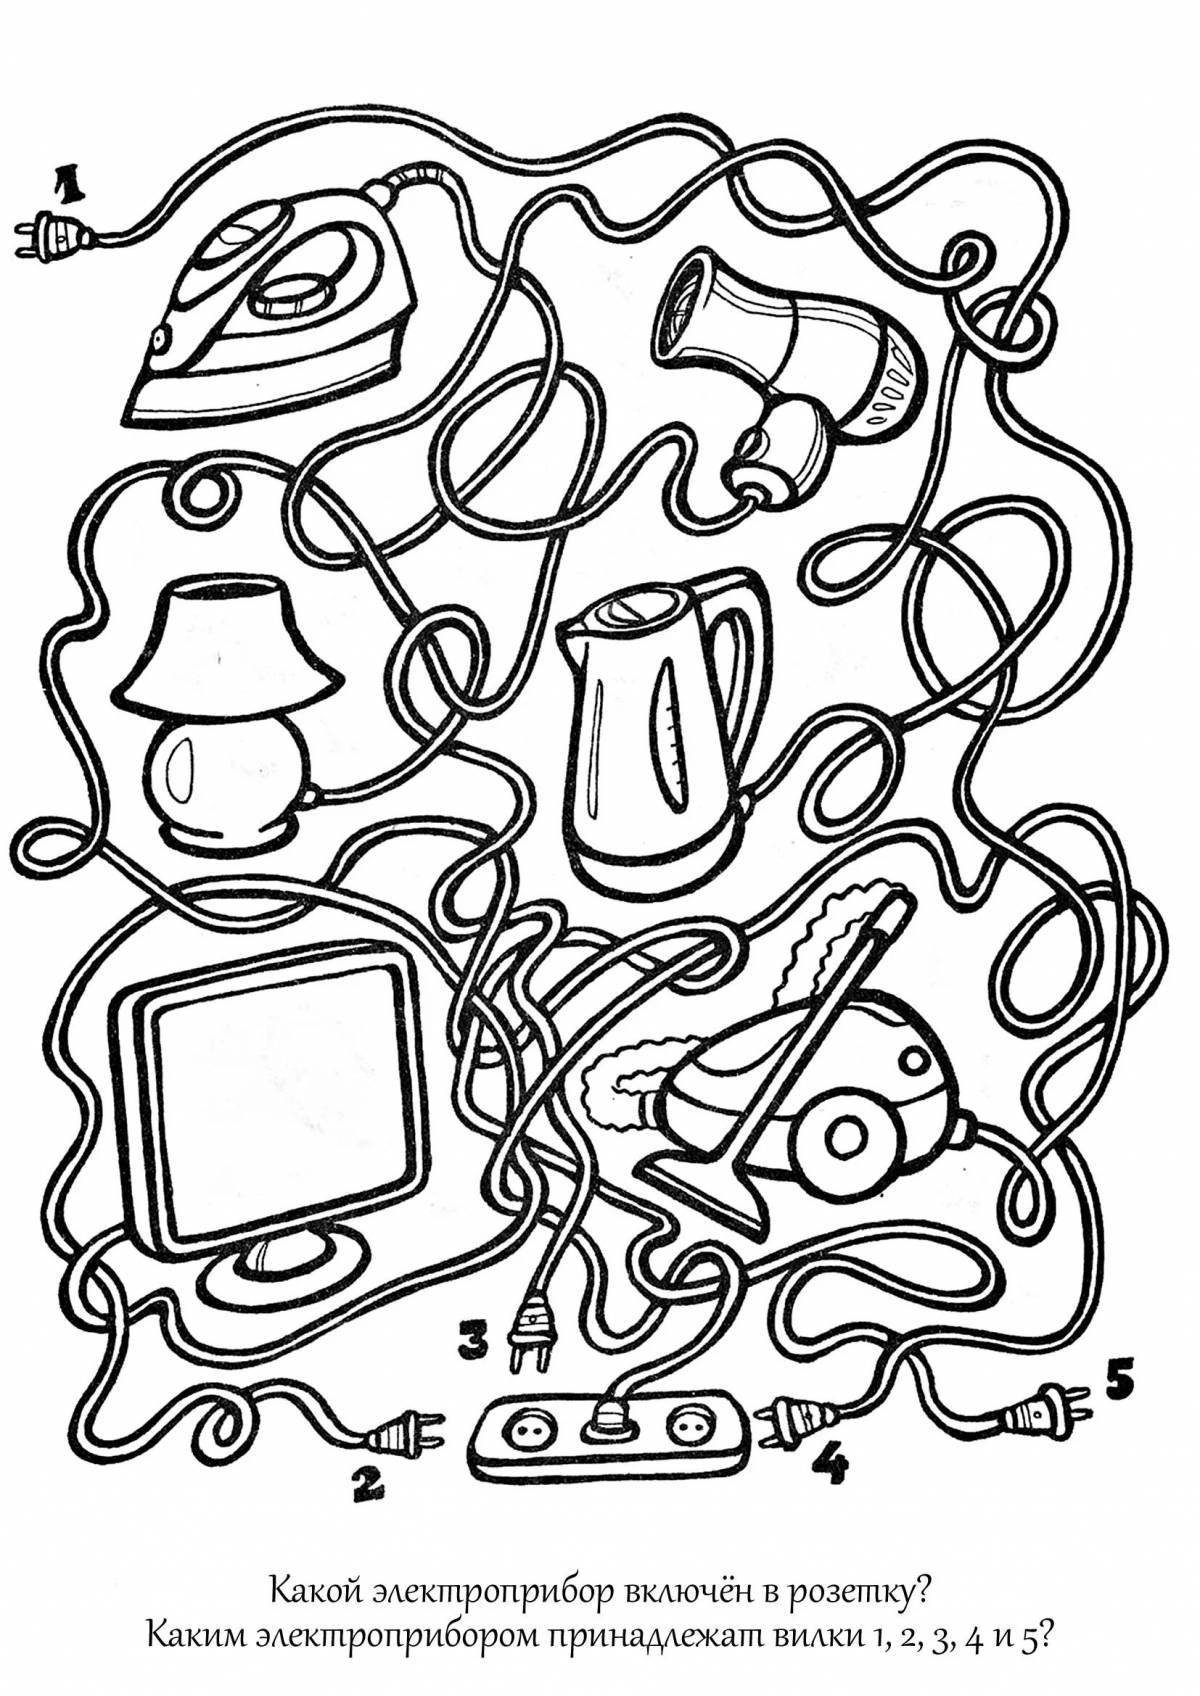 Fun electrical coloring book for kids 5-6 years old